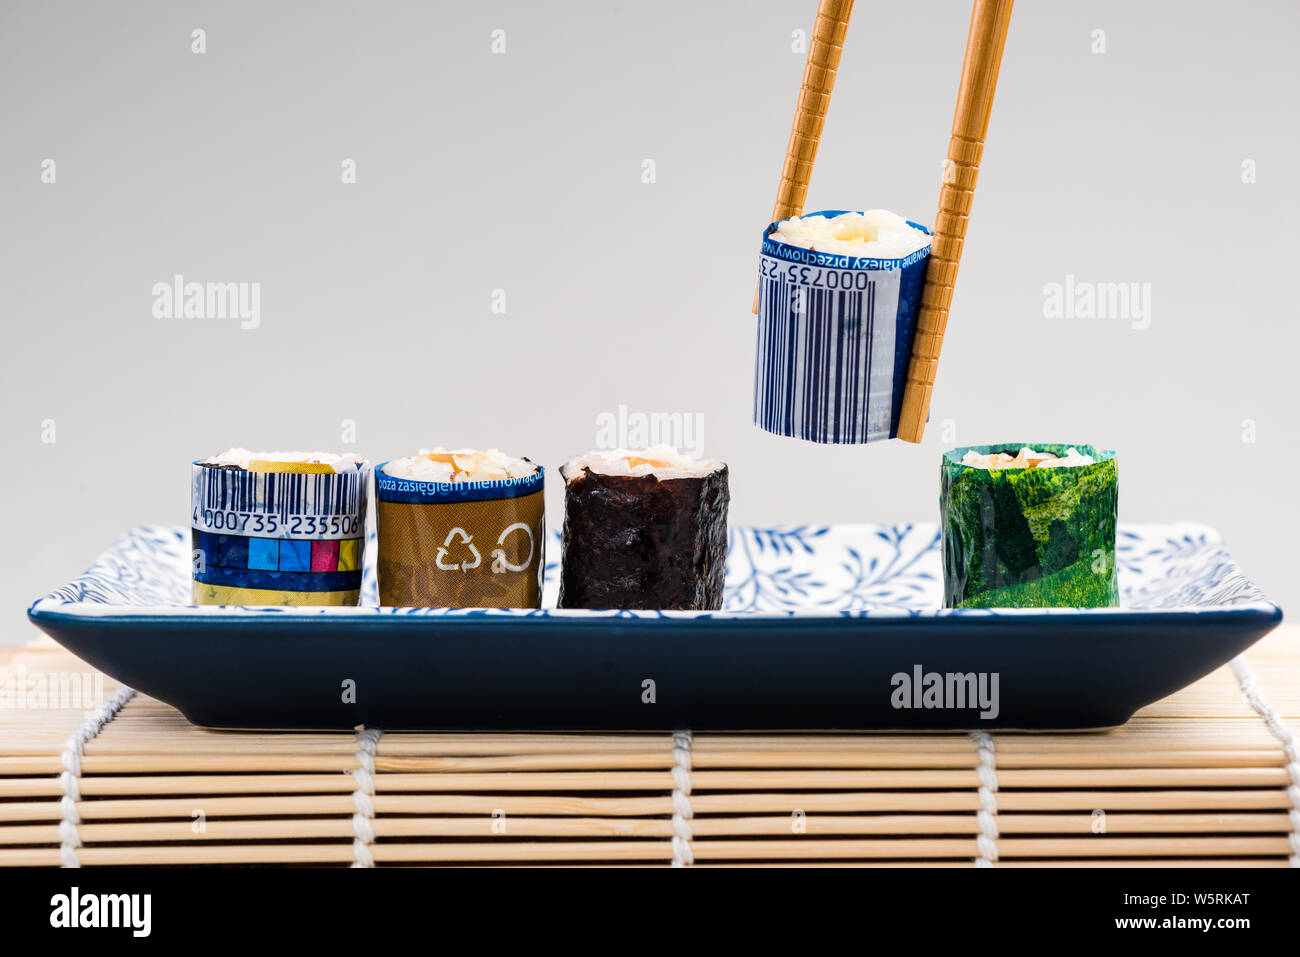 Sushi Wrapped in Plastic, Ocean Pollution Conceptual Image. Copy Space Poster. Stock Photo